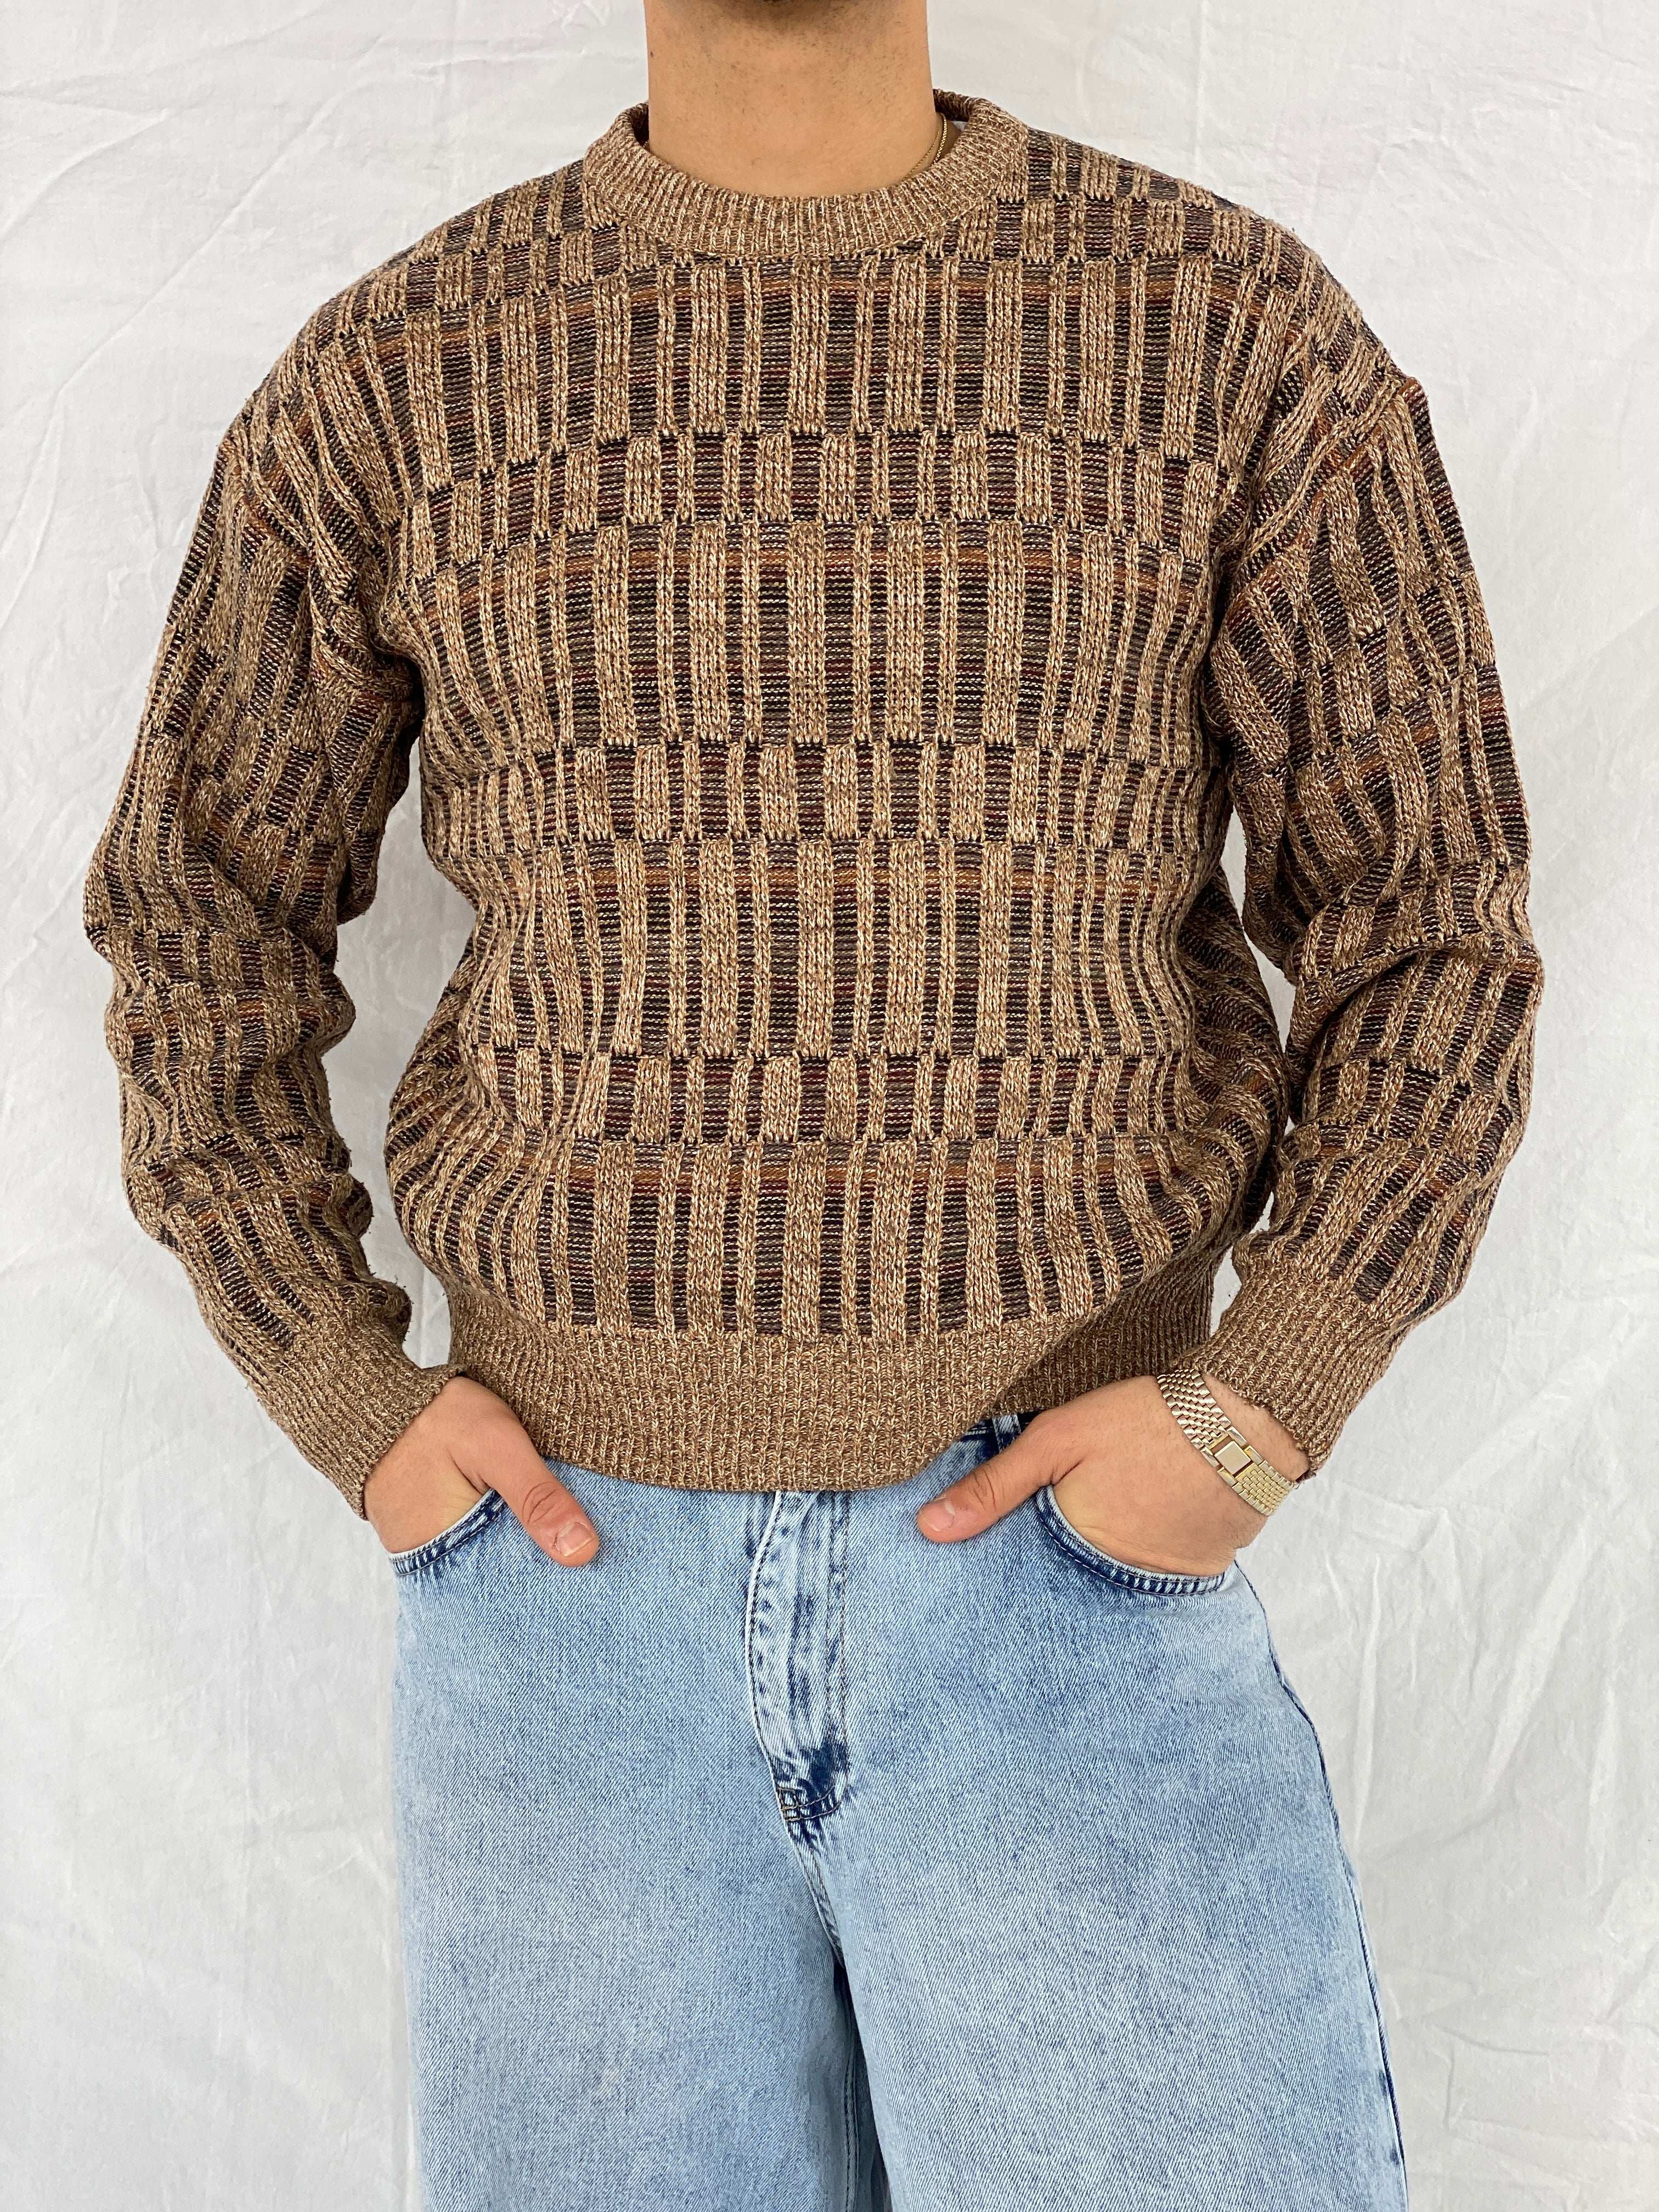 Vintage 90s David Taylor Beige And Brown Knitted Sweater - Size M